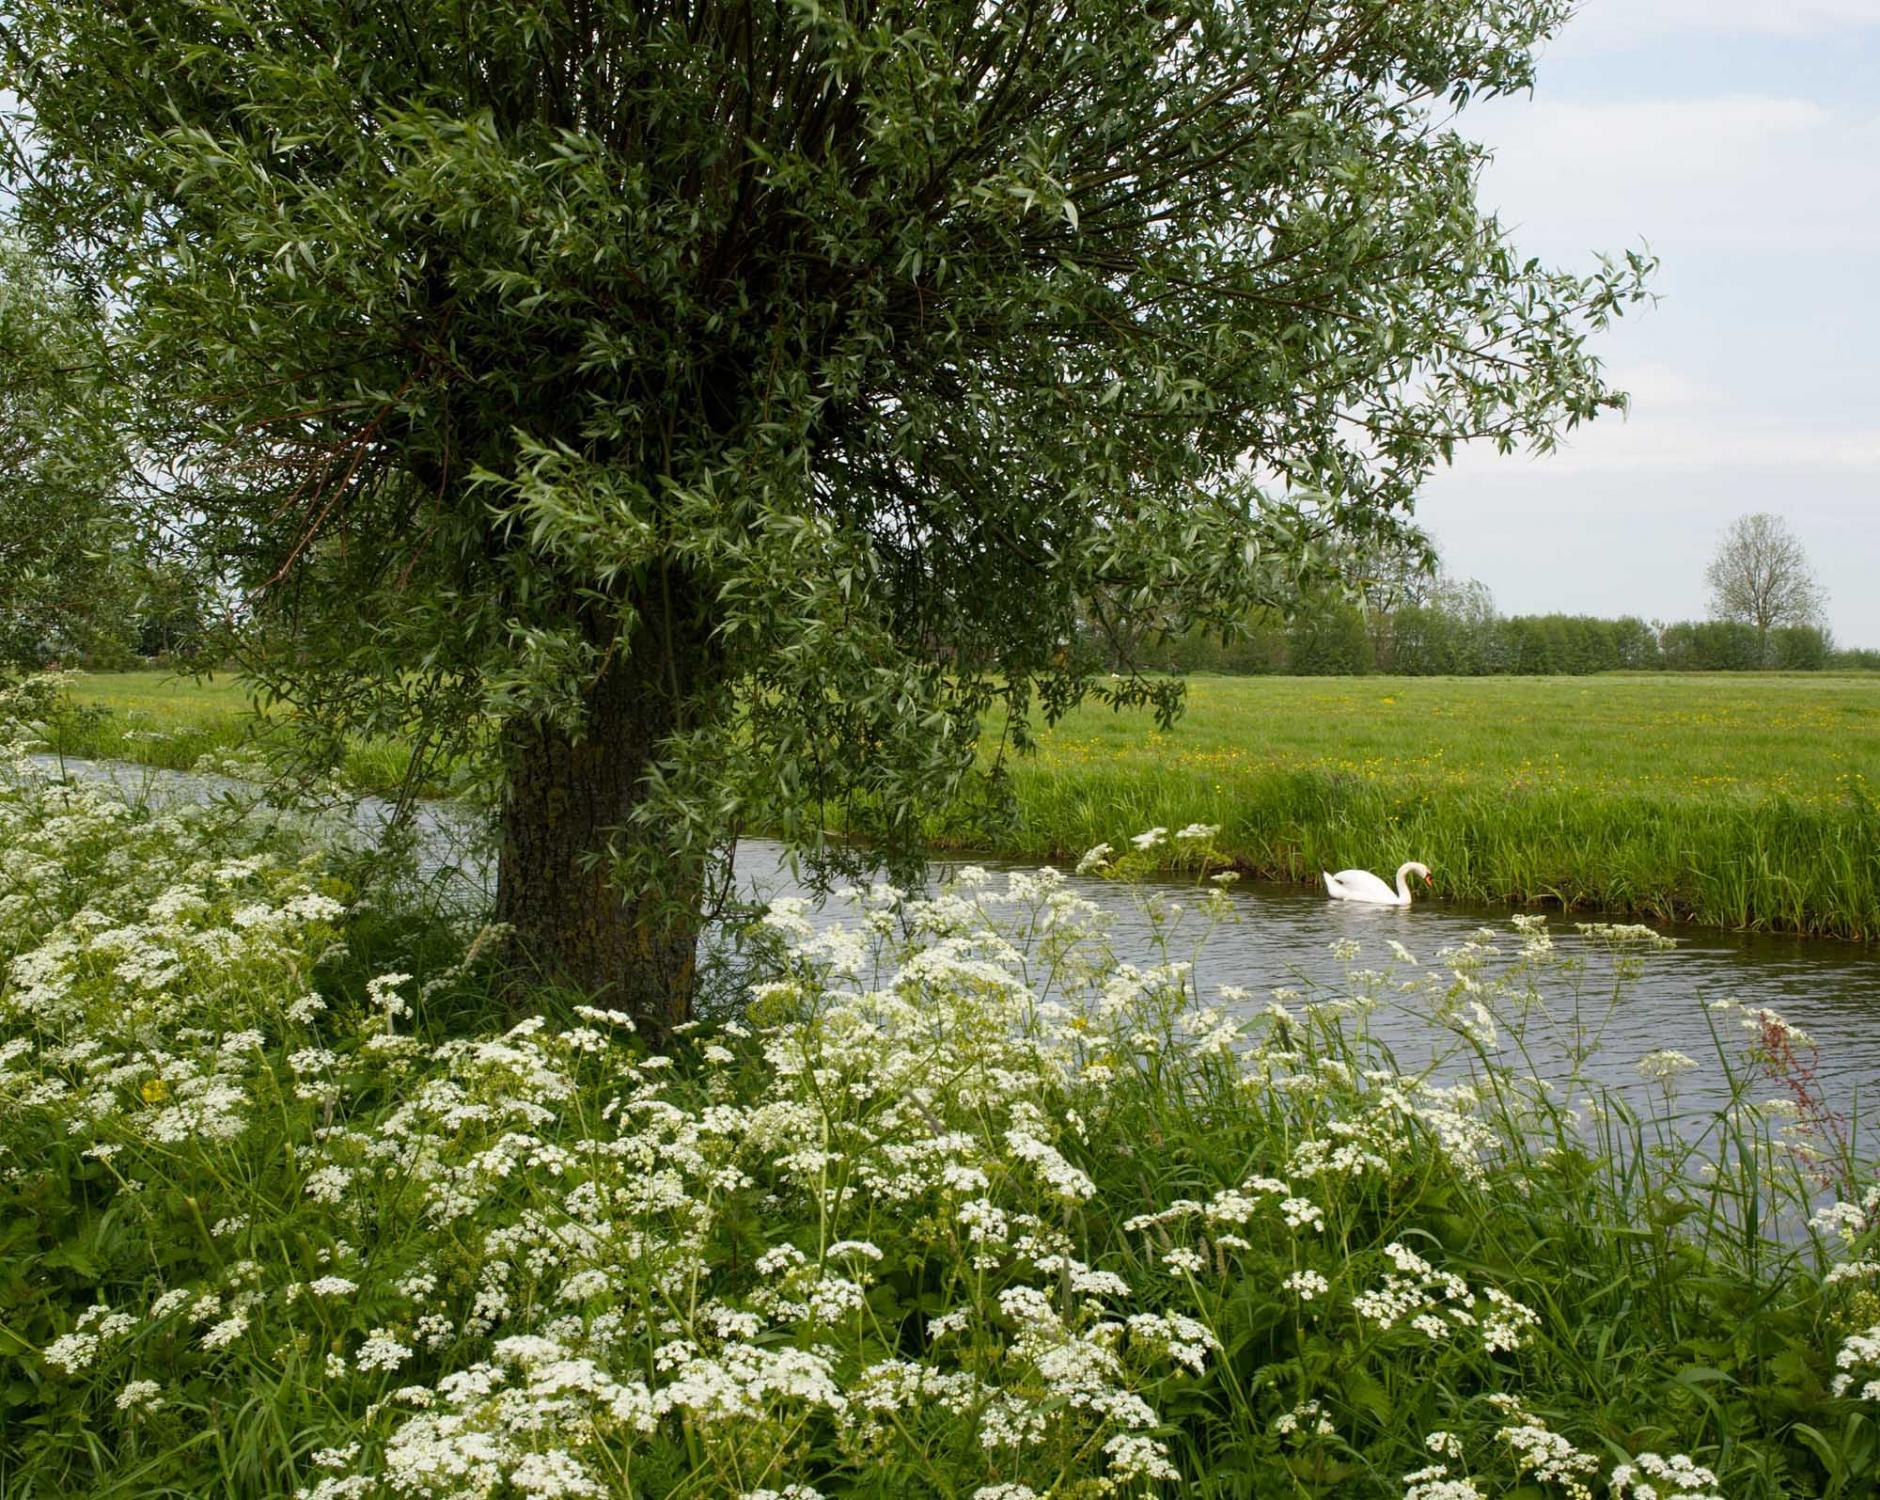 The Netherlands - Pollard willow, cow parsley and white swan. Kamerik,...